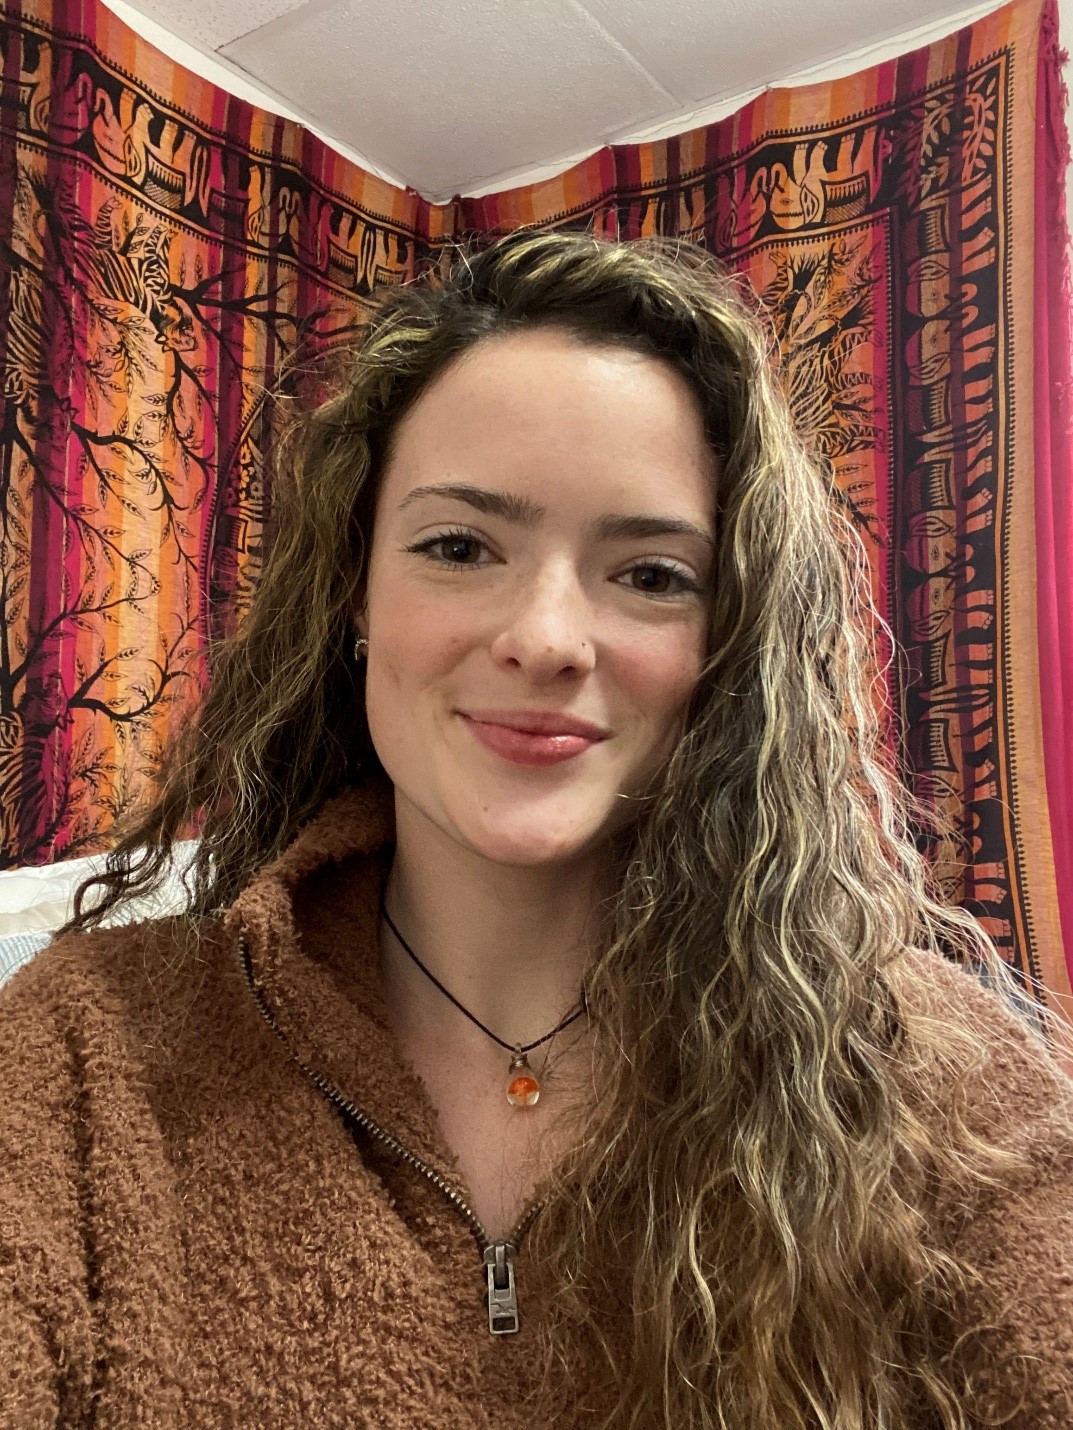 A headshot of Rachel Reycroft. She is wearing a fuzzy brown quarter zip sweater. She has long brown hair with blonde highlights. Behind her is a red, yellow, and orange tapestry.